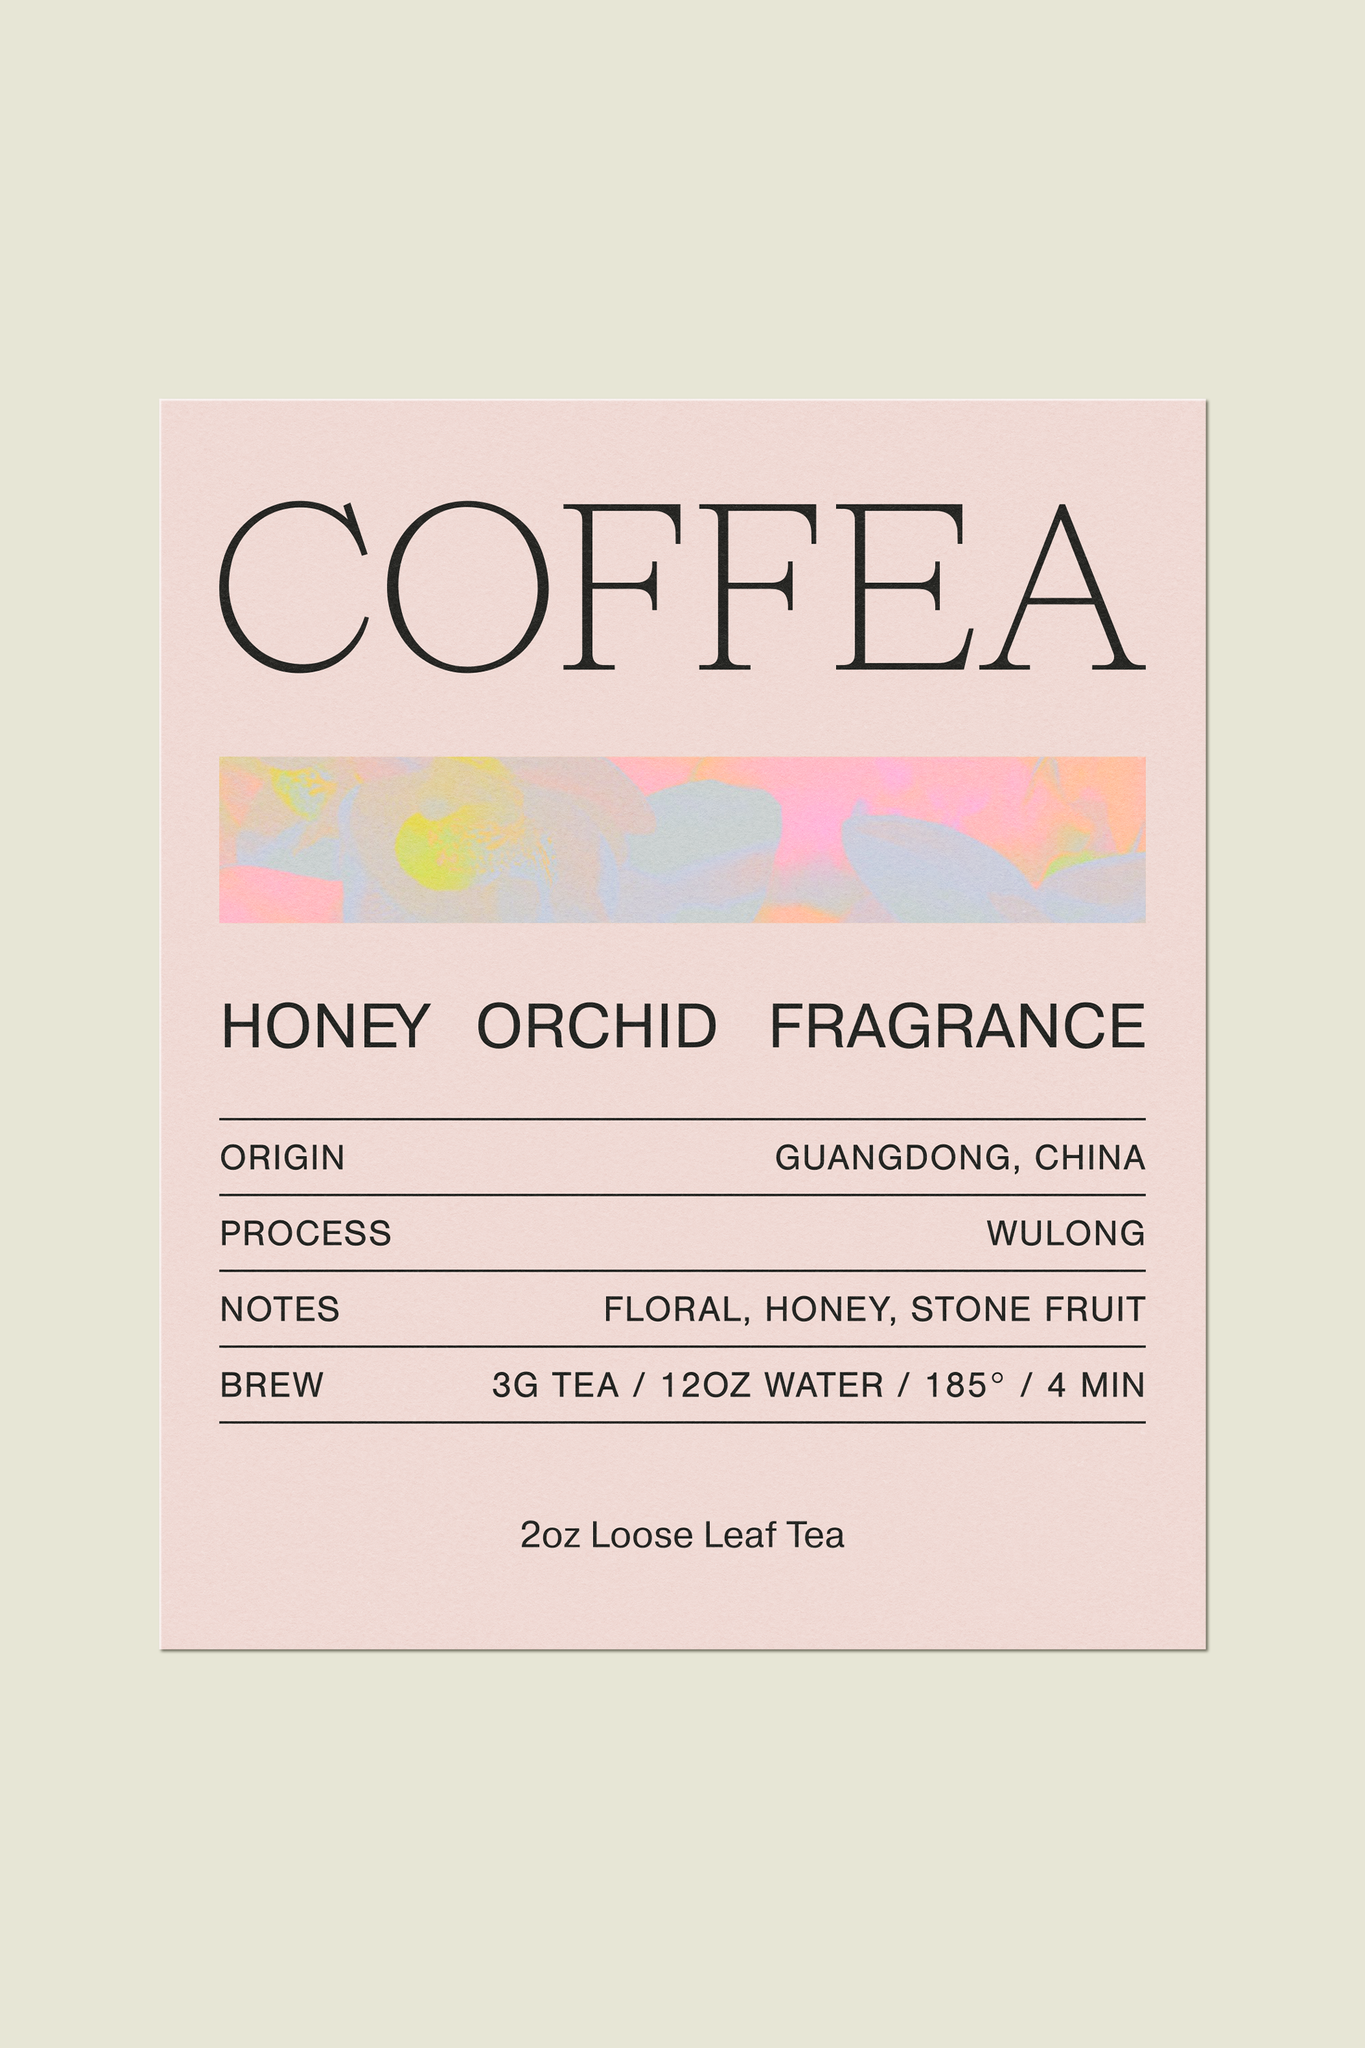 Honey Orchid Fragrance wulong tea from Guangdong, China - Coffea Roasterie